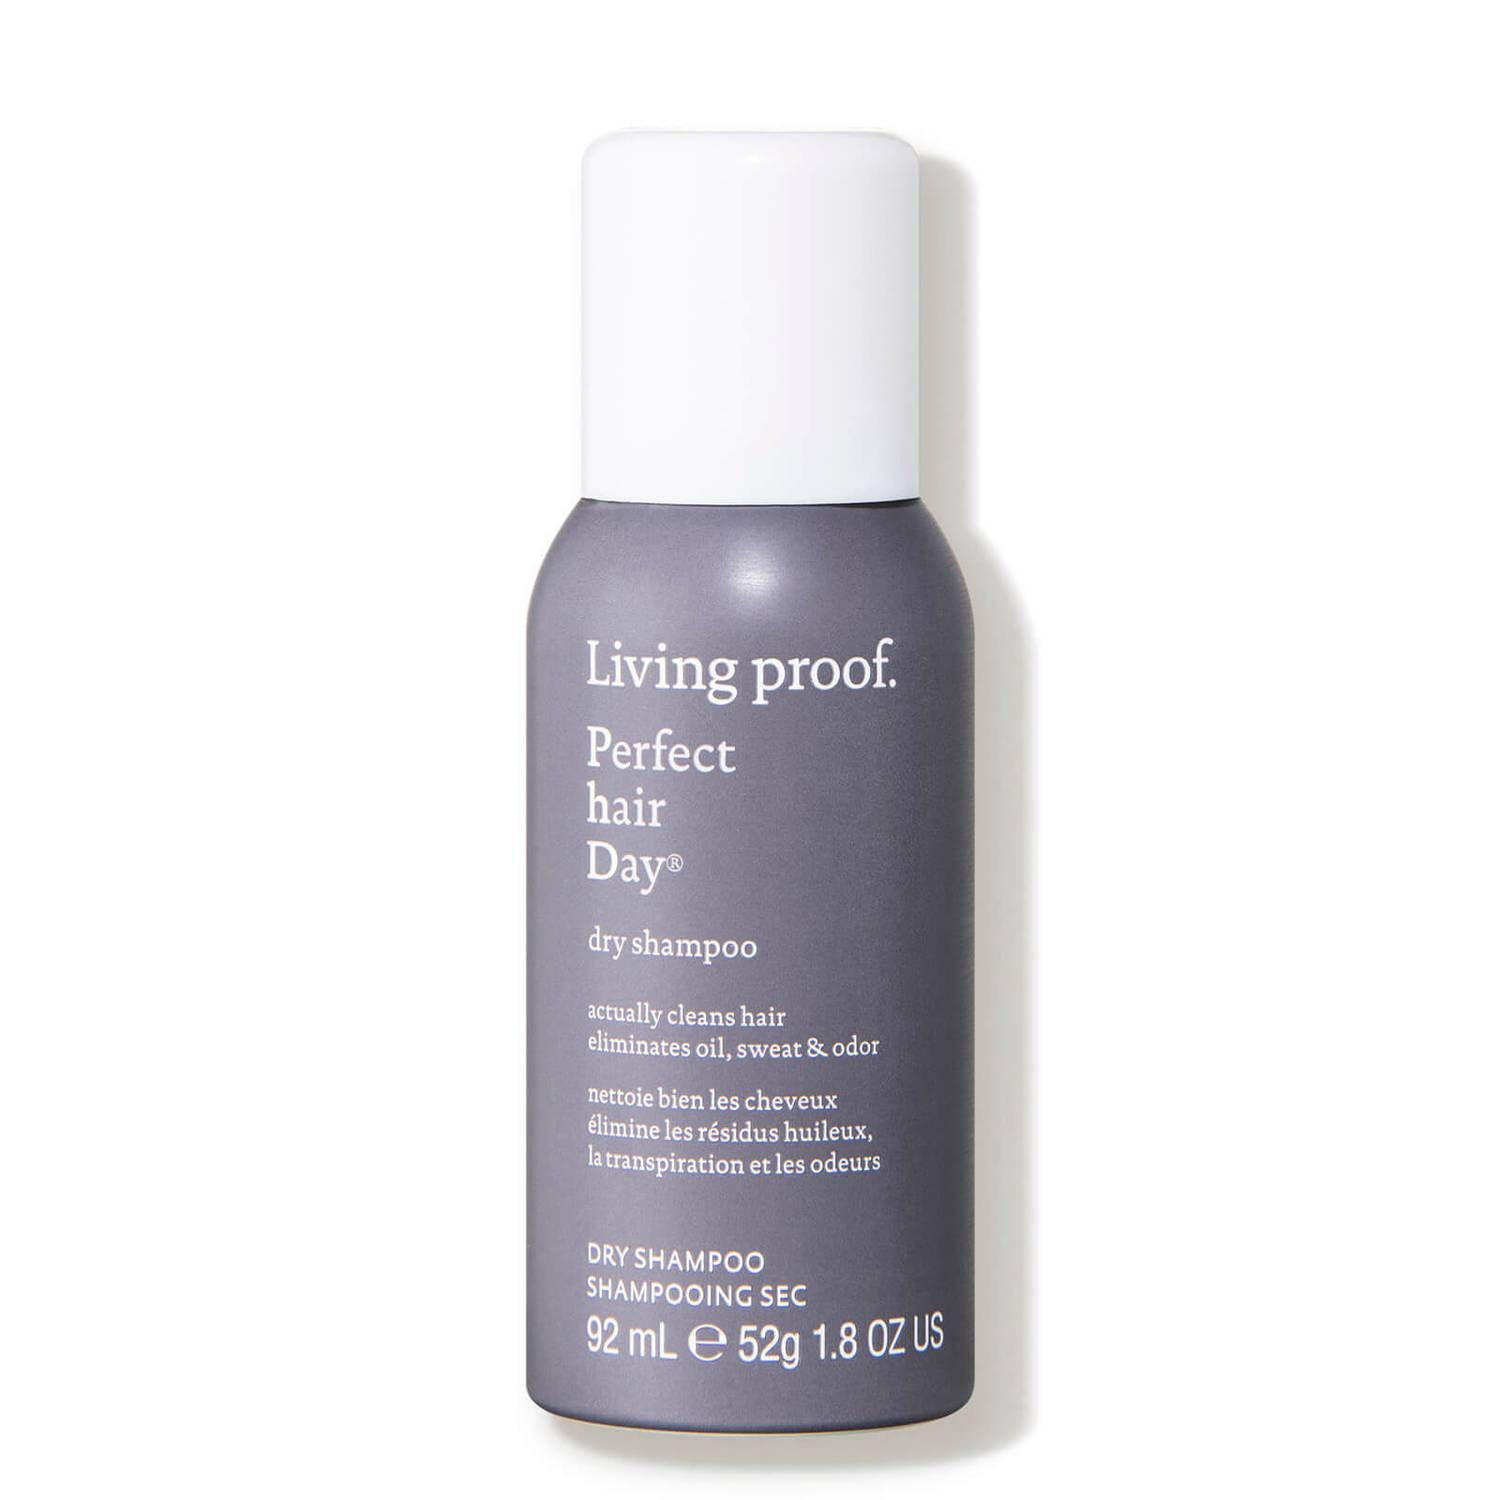 Living Proof Perfect hair Day Dry Shampoo (1.8 oz.) | Dermstore (US)